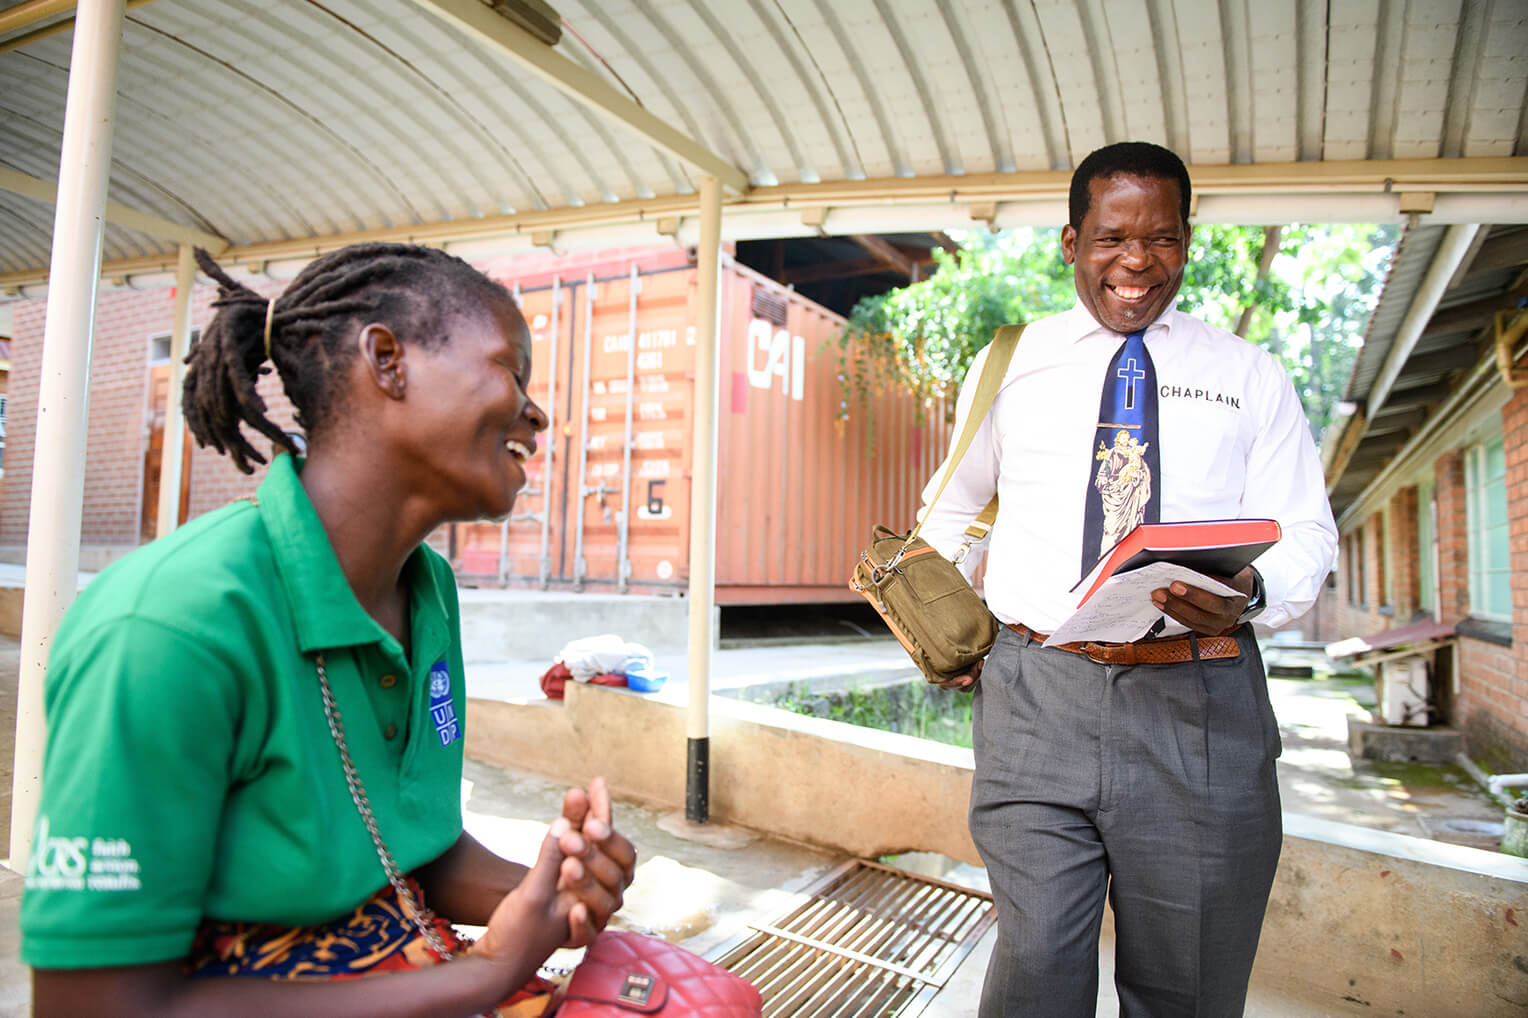 Overjoyed, Mercy can now read Scripture in her native language of Chichewa for the first time in her life.